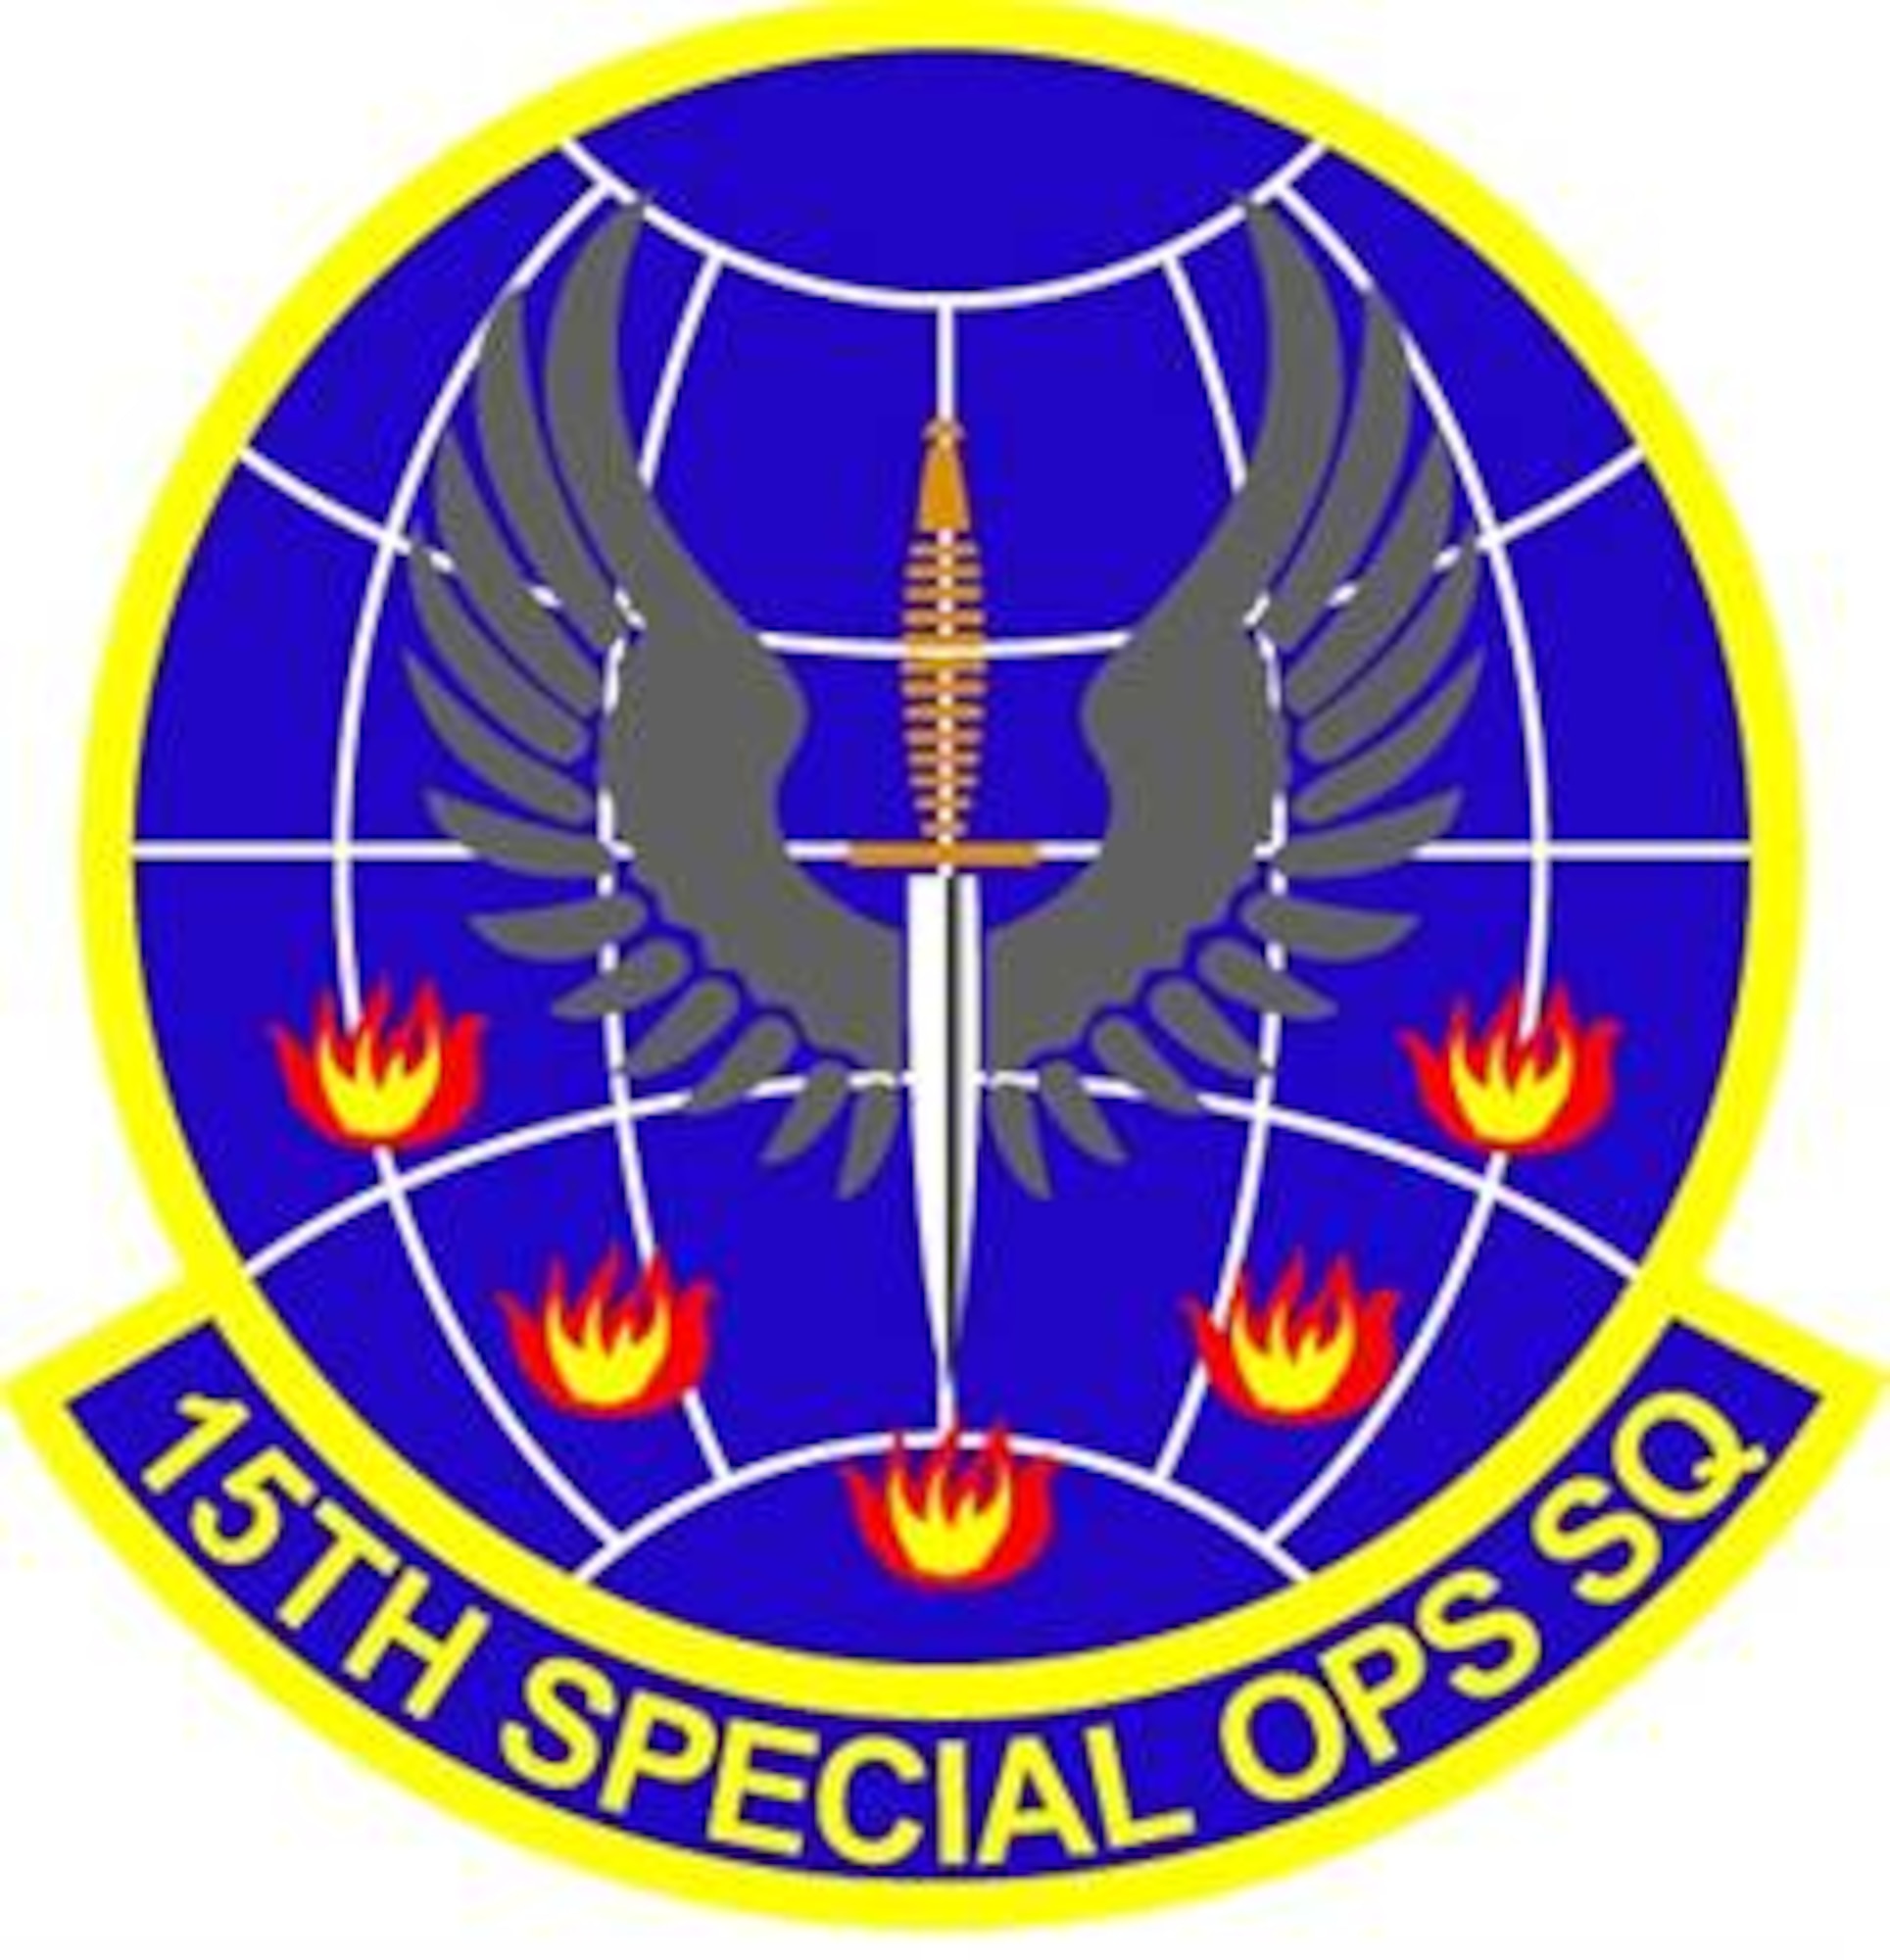 15th Special Operations Squadron emblem significance: Blue represents the sky, the primary theater of Air Force operations. Yellow signifies the sun and the excellence required of Air Force personnel. The globe reflects the worldwide scope of special operations. The winged dagger is symbolic of the squadron's ability to deliver precision operations anywhere and anytime. The flames allude to bomb blasts and recall the squadron's predecessor unit (15th Bombardment Squadron). They also signify the five theater commands to which the squadron provides support and point out the specialized nature of most special operations missions.